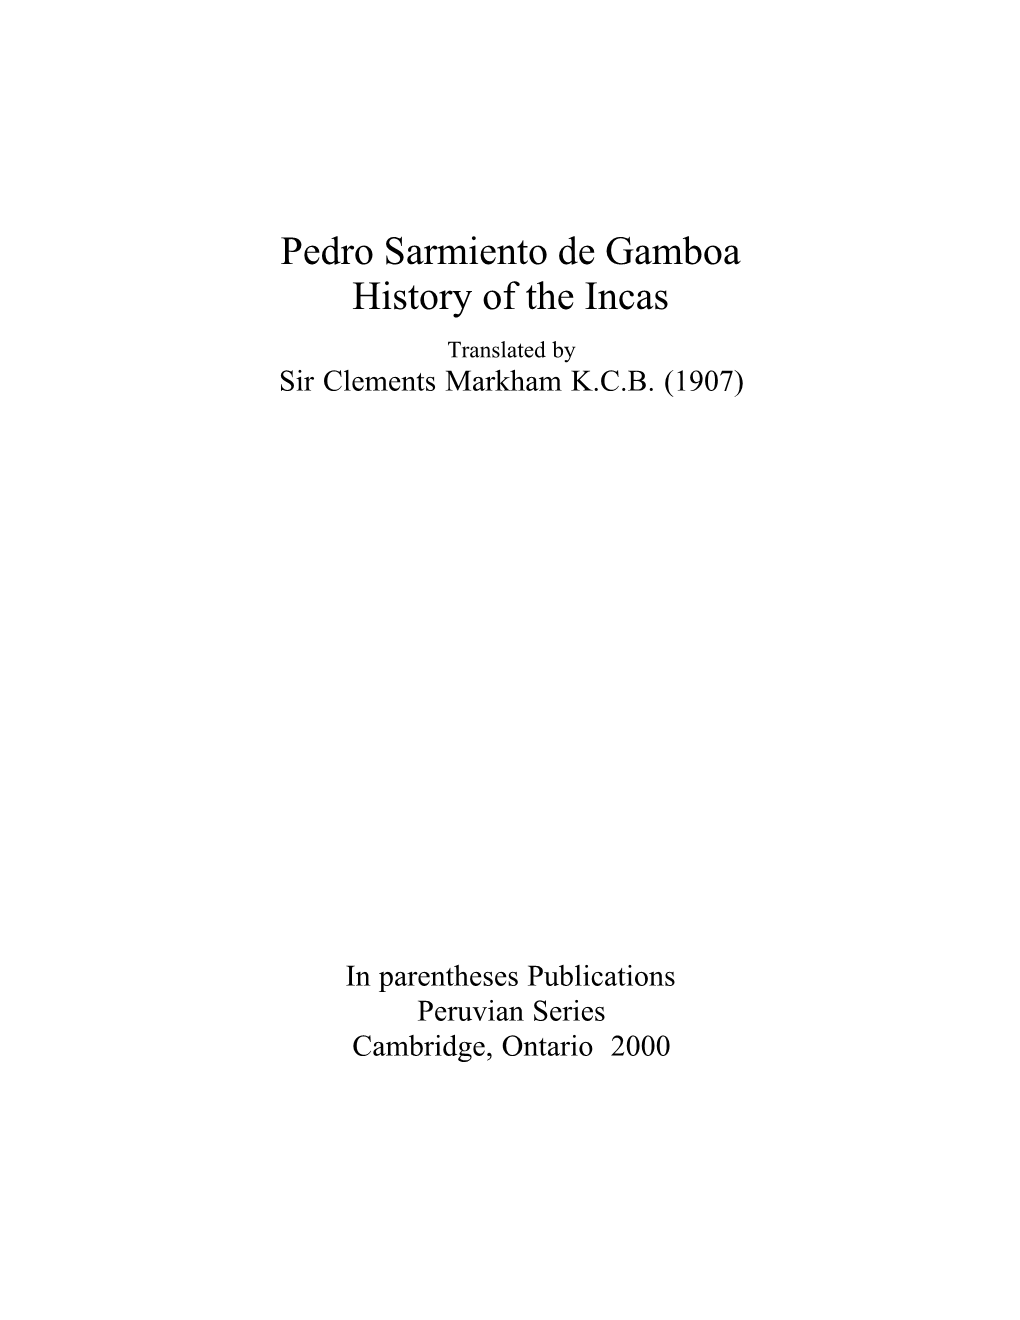 Pedro Sarmiento De Gamboa History of the Incas Translated by Sir Clements Markham K.C.B